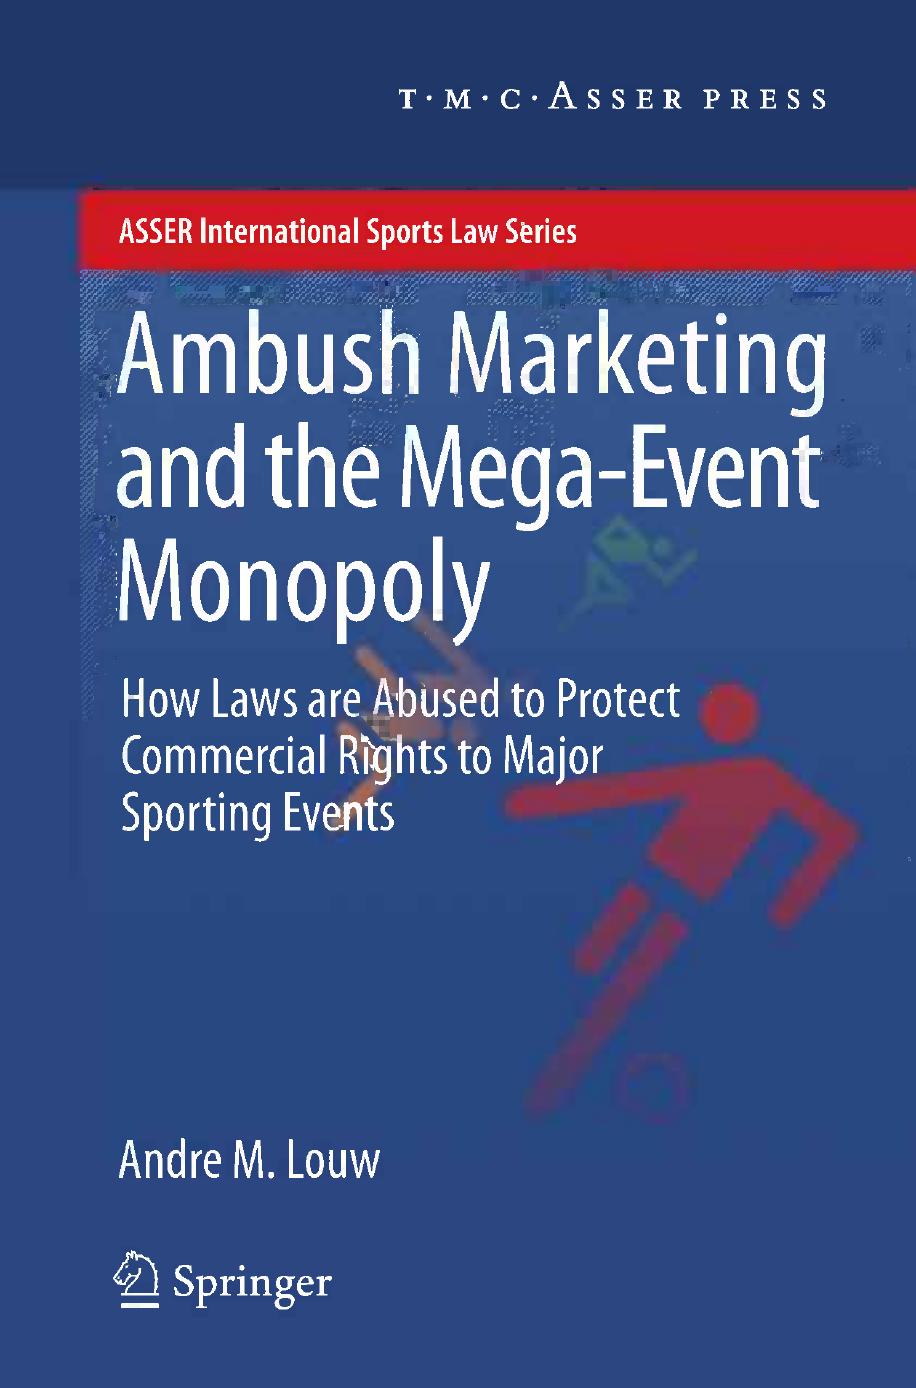 Andre M. Louw (auth.) Ambush Marketing & the Mega-Event Monopoly How Laws are Abused to Protect Commercial Rights to Major Sporting Events 2012